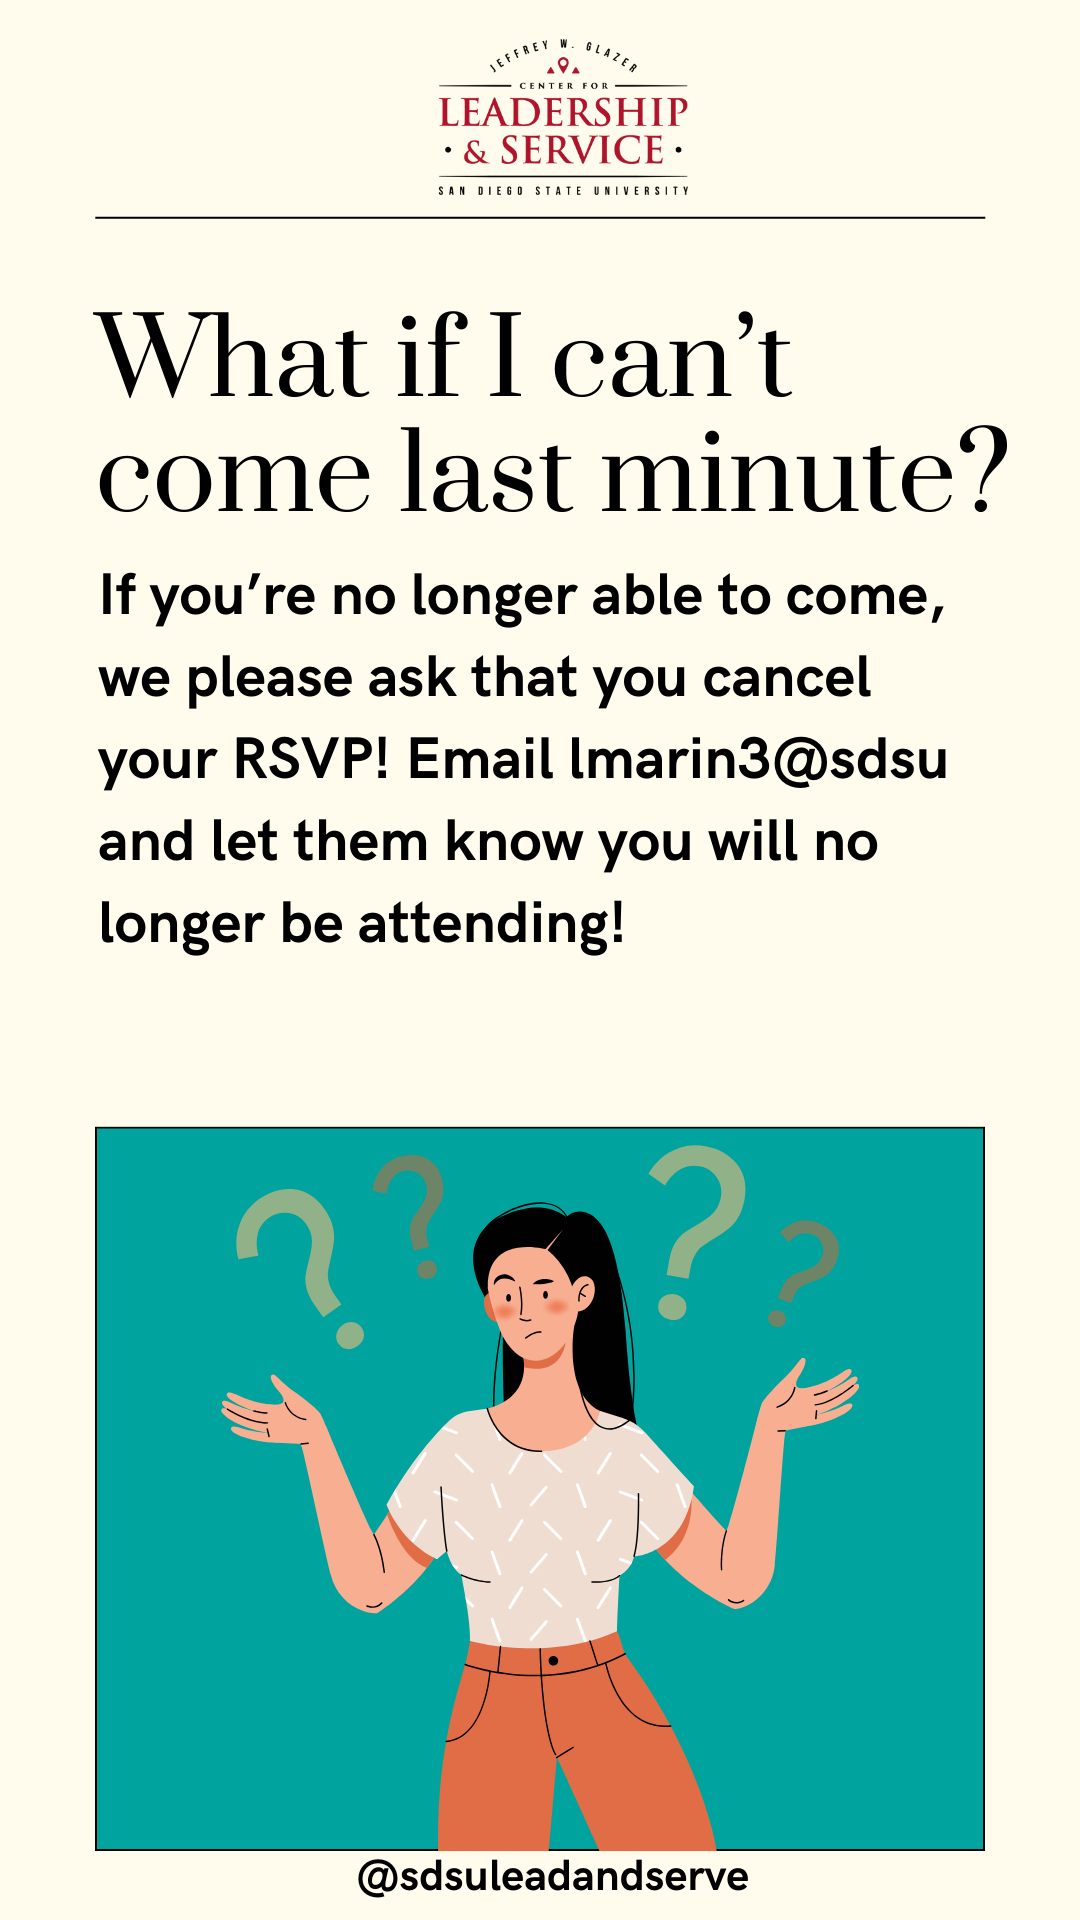 What if I can't come last minute? If you’re no longer able to come, we please ask that you cancel your RSVP! Email lmarin3@sdsu and let them know you will no longer be attending!